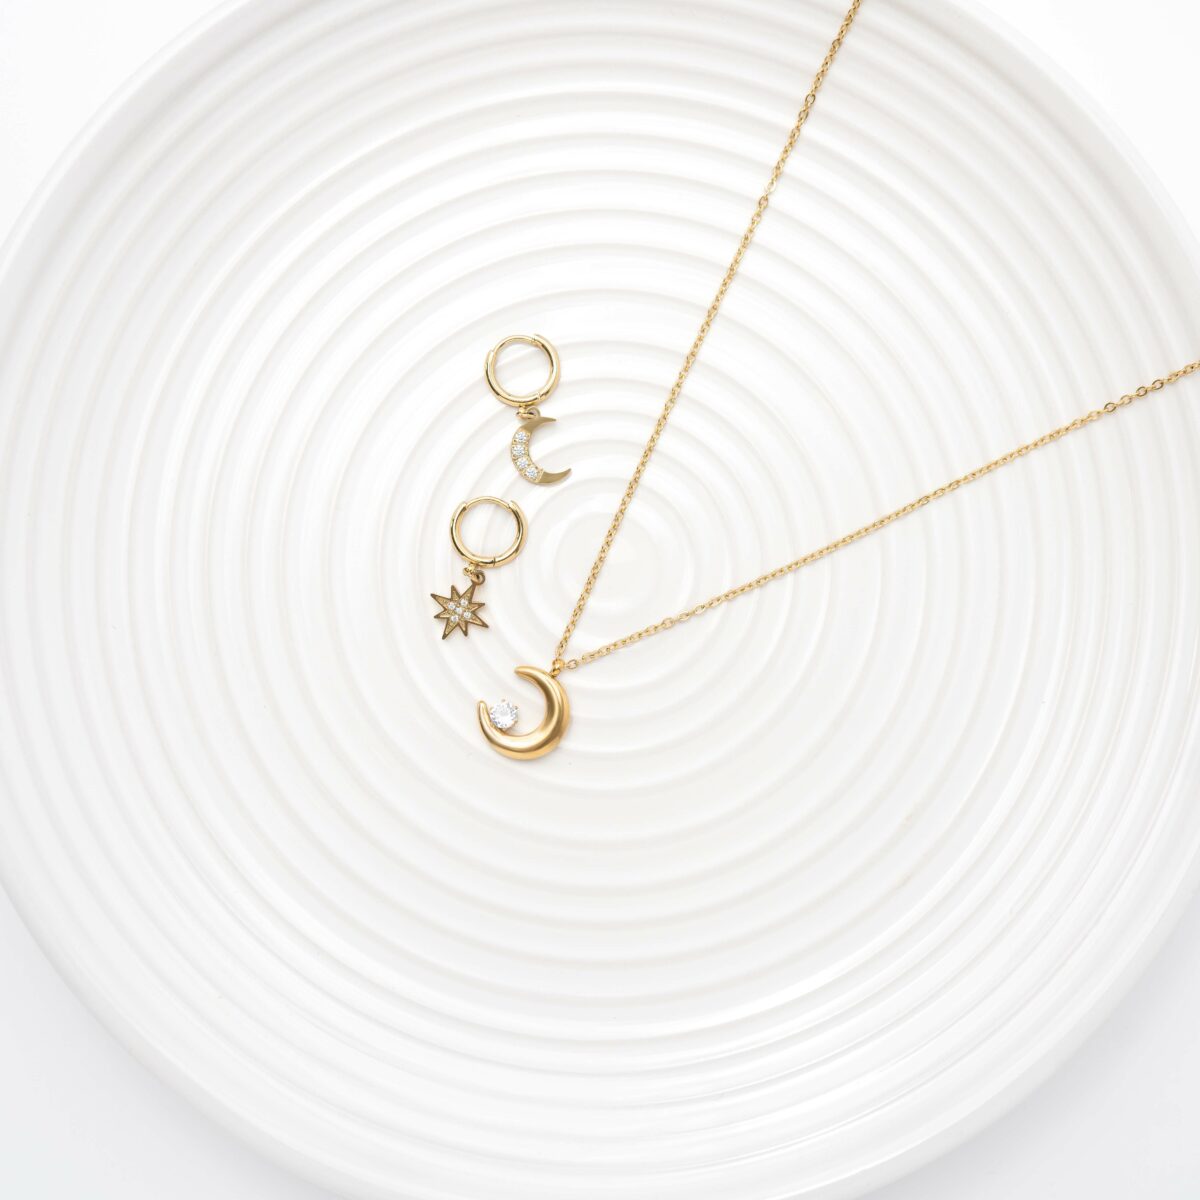 https://m.clubbella.co/product/half-moon-solitaire-pendant-necklace/ Resized (39 of 134)